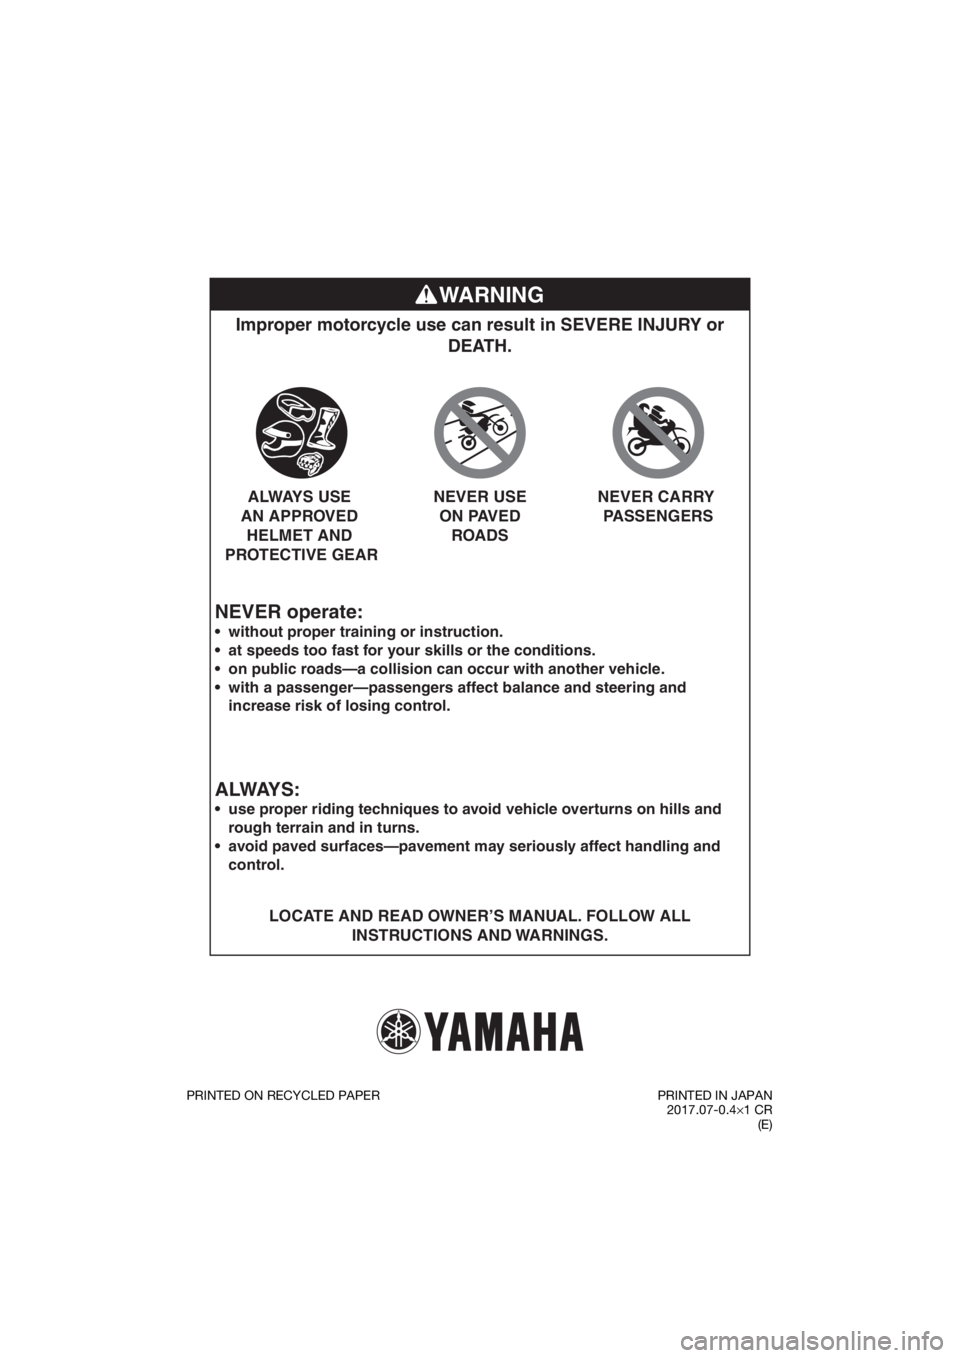 YAMAHA YZ85 2018 Manual Online WARNING
NEVER operate:
Improper motorcycle use can result in SEVERE INJURY or DEATH.
LOCATE AND READ OWNER’S MANUAL. FOLLOW ALL 
INSTRUCTIONS AND WARNINGS.



without proper training or instruction.